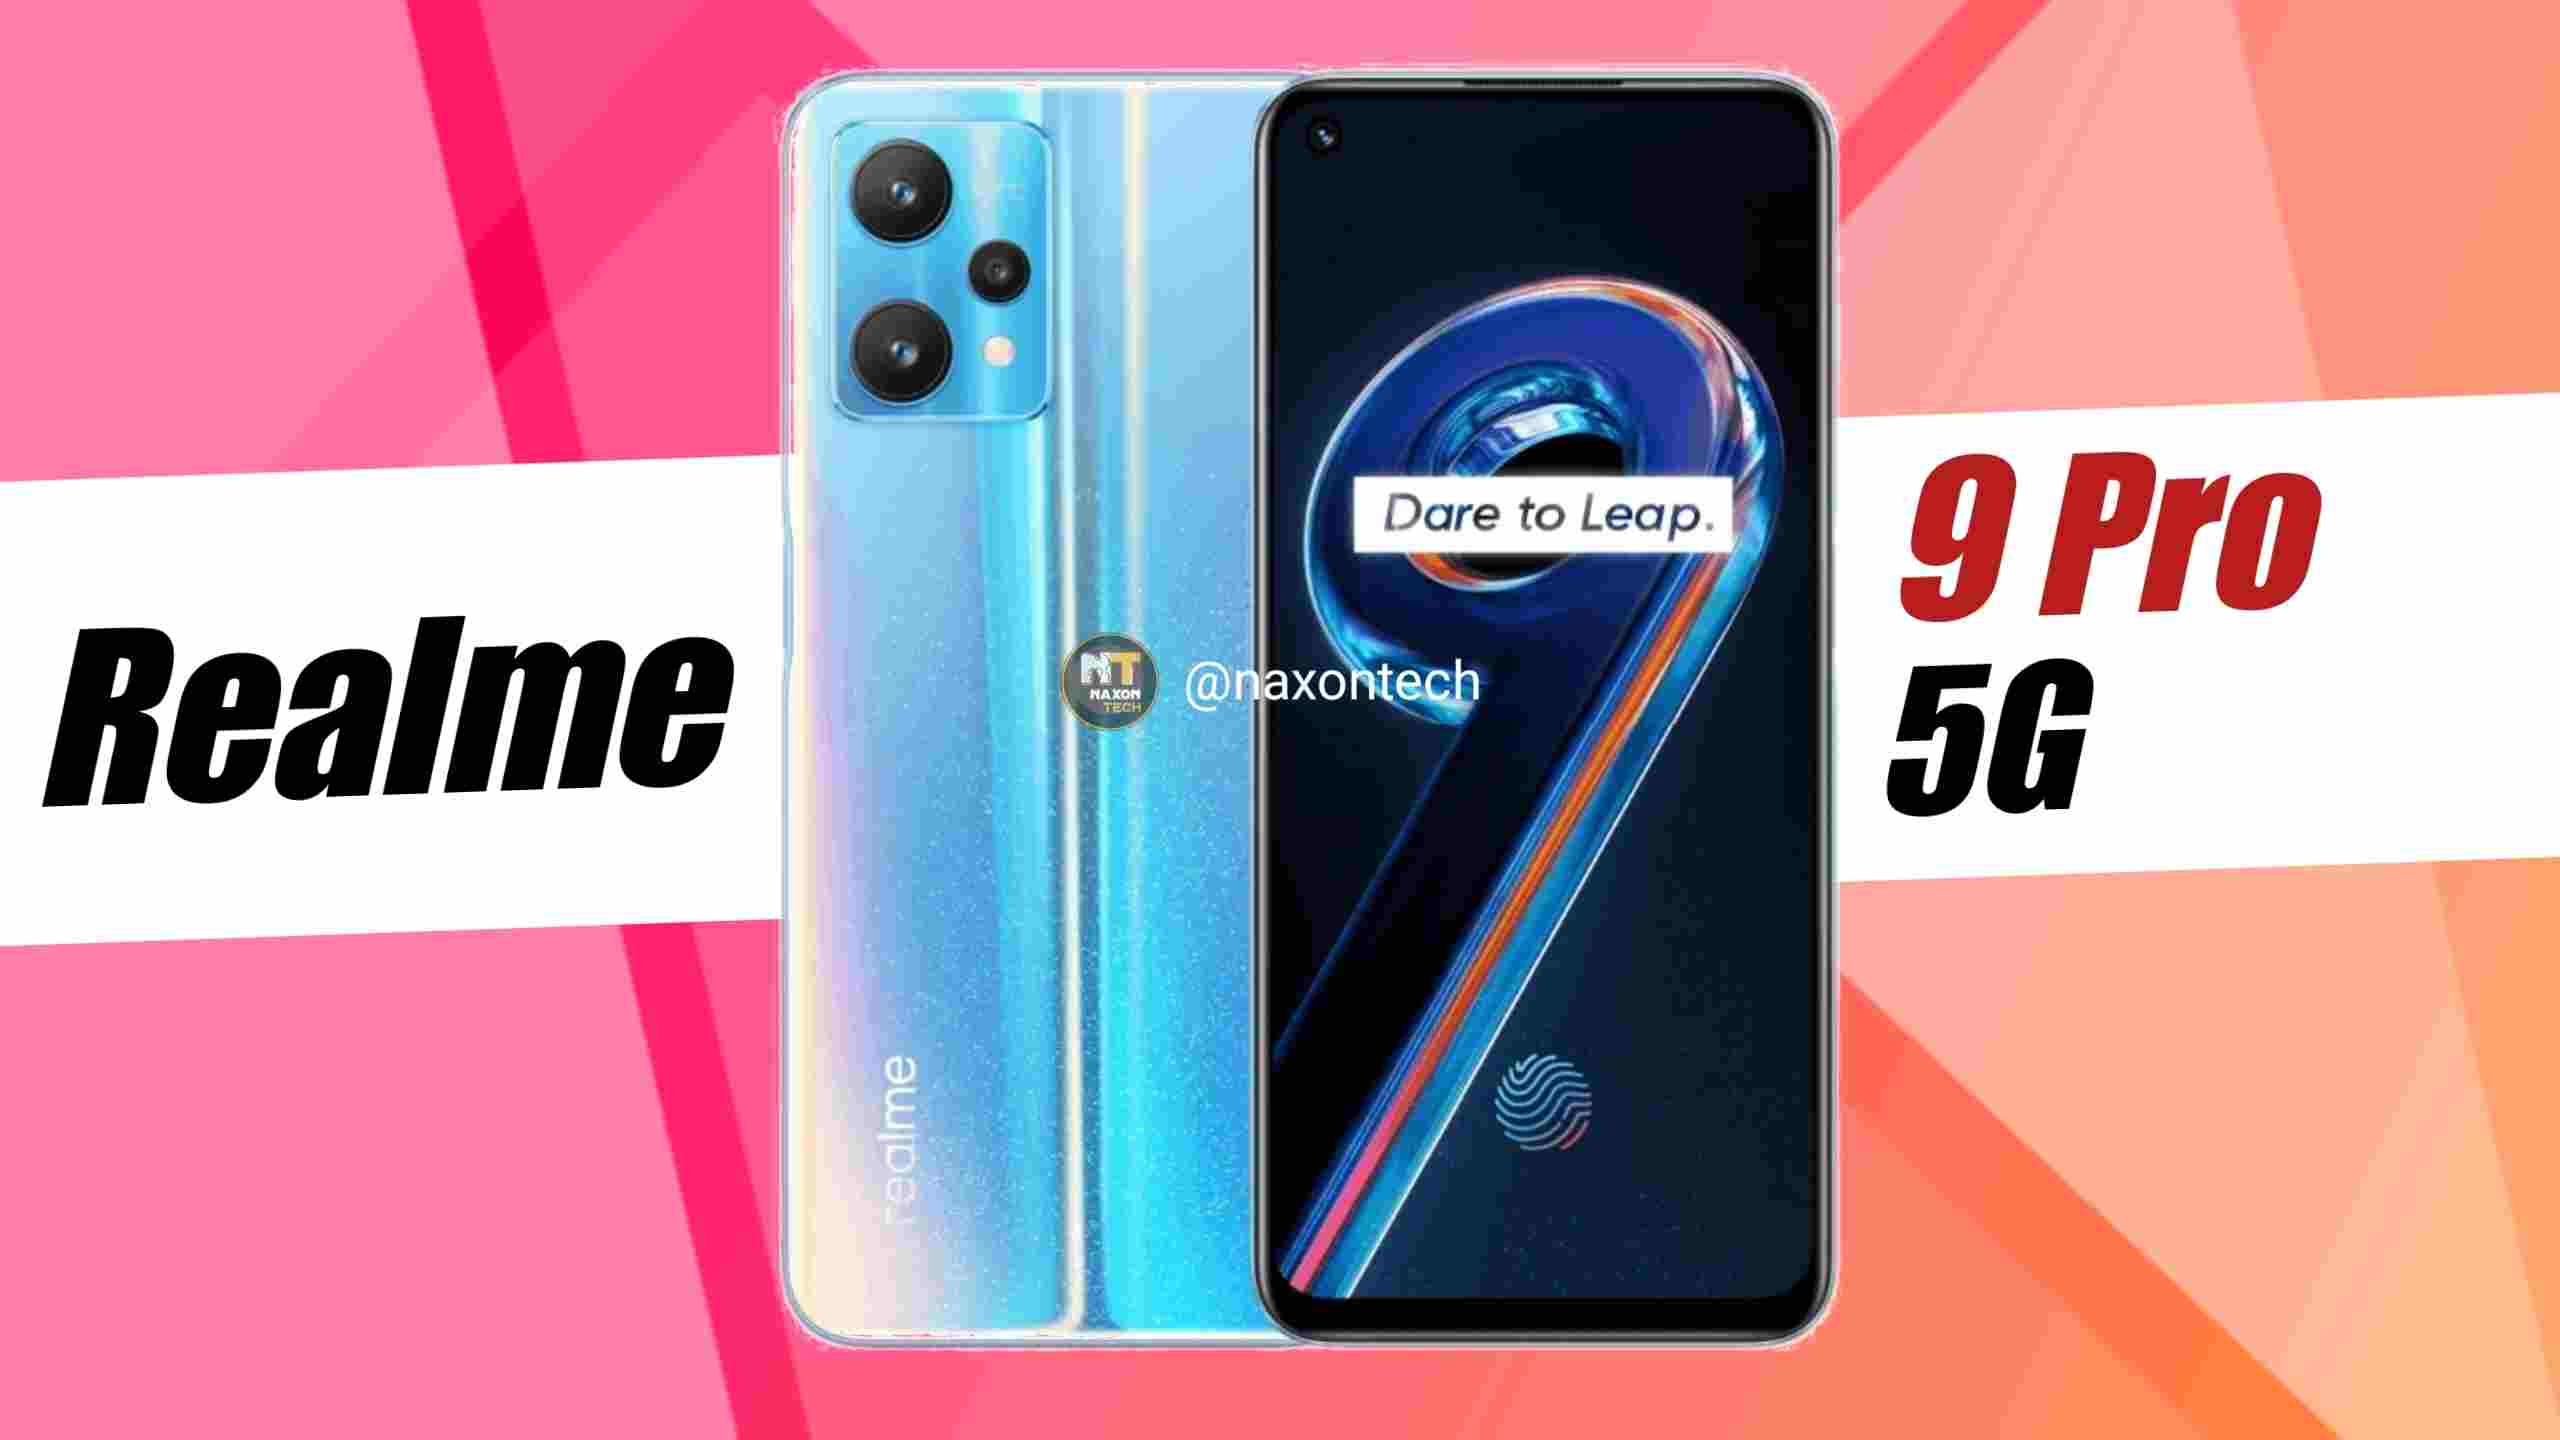 Realme 9 Pro 5G with Snapdragon 695, 64MP triple Rear Camera launched in India: Price, Specifications